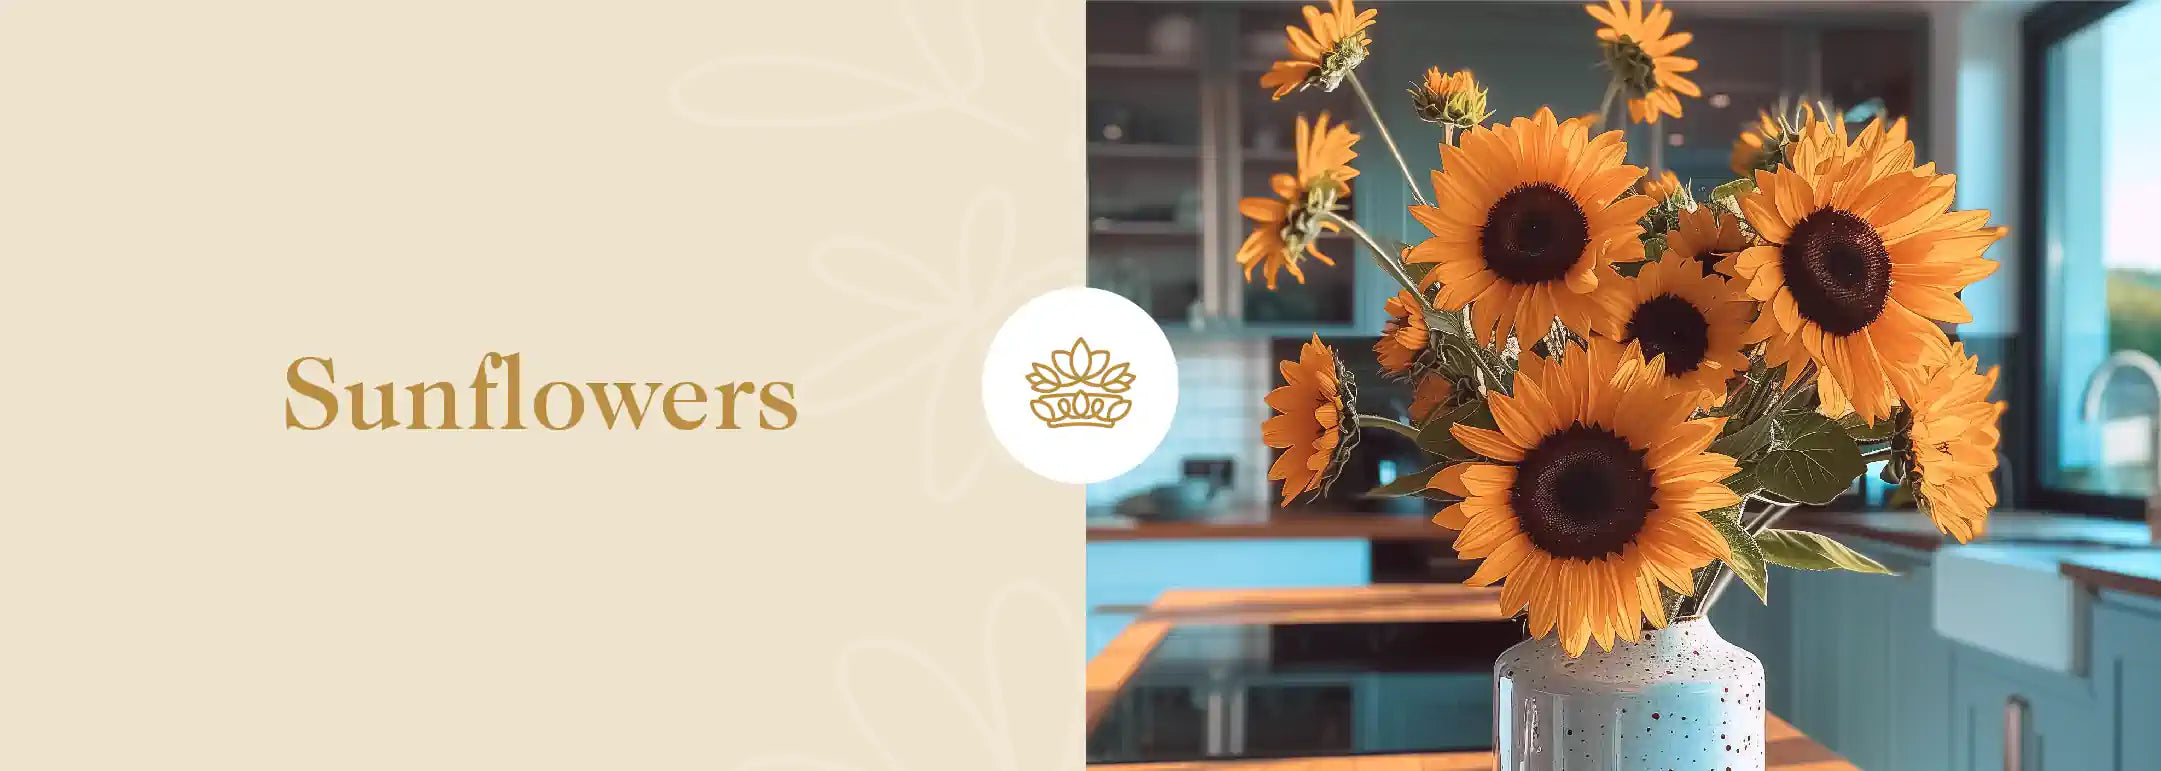 A vibrant bouquet of sunflowers arranged in a modern kitchen, their bright yellow petals radiating warmth and cheer. This image showcases the Sunflowers Collection from Fabulous Flowers and Gifts, perfect for brightening any space.